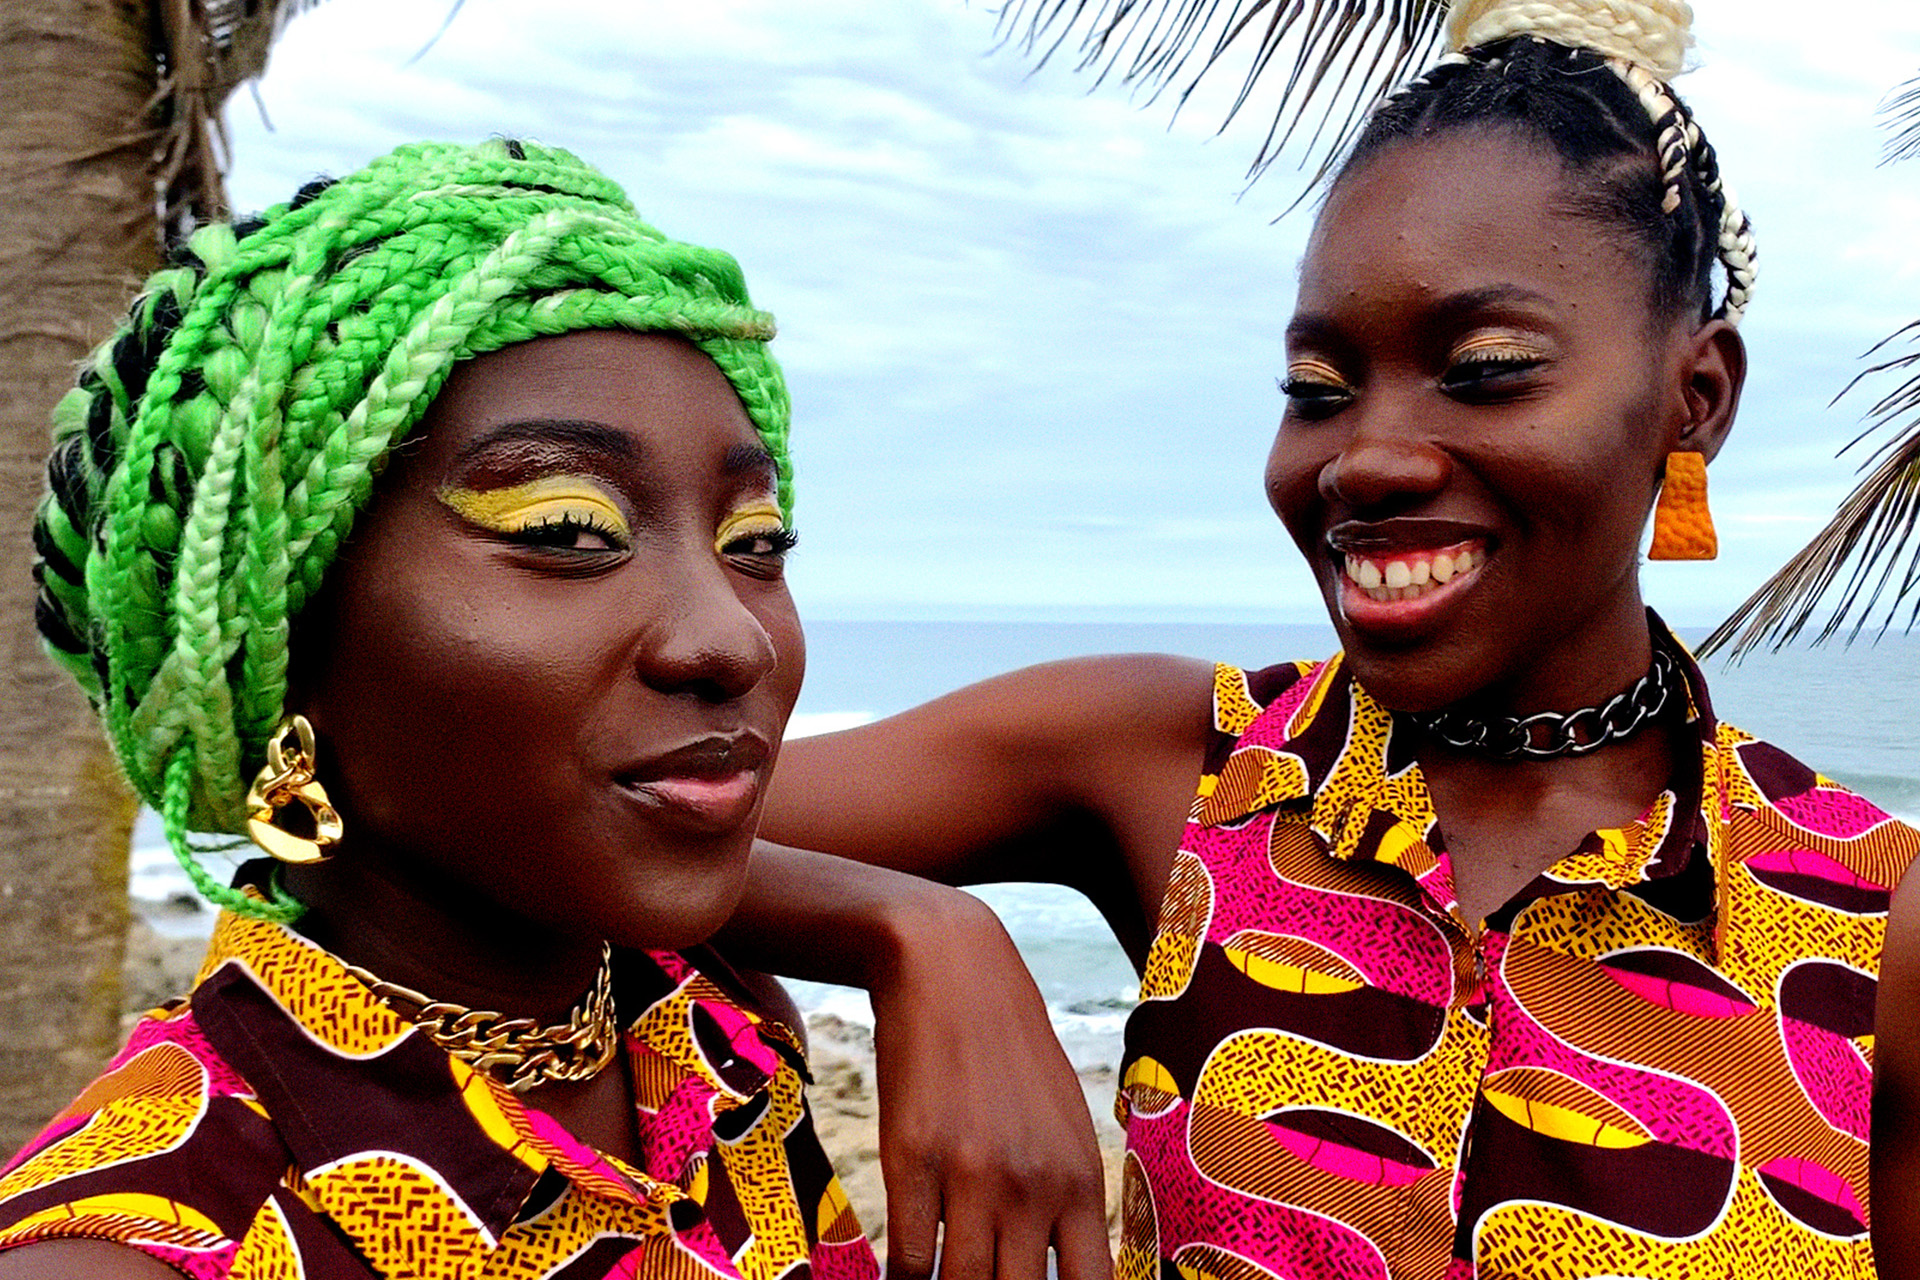 Two women in matching printed dresses pose and smile at the beach.